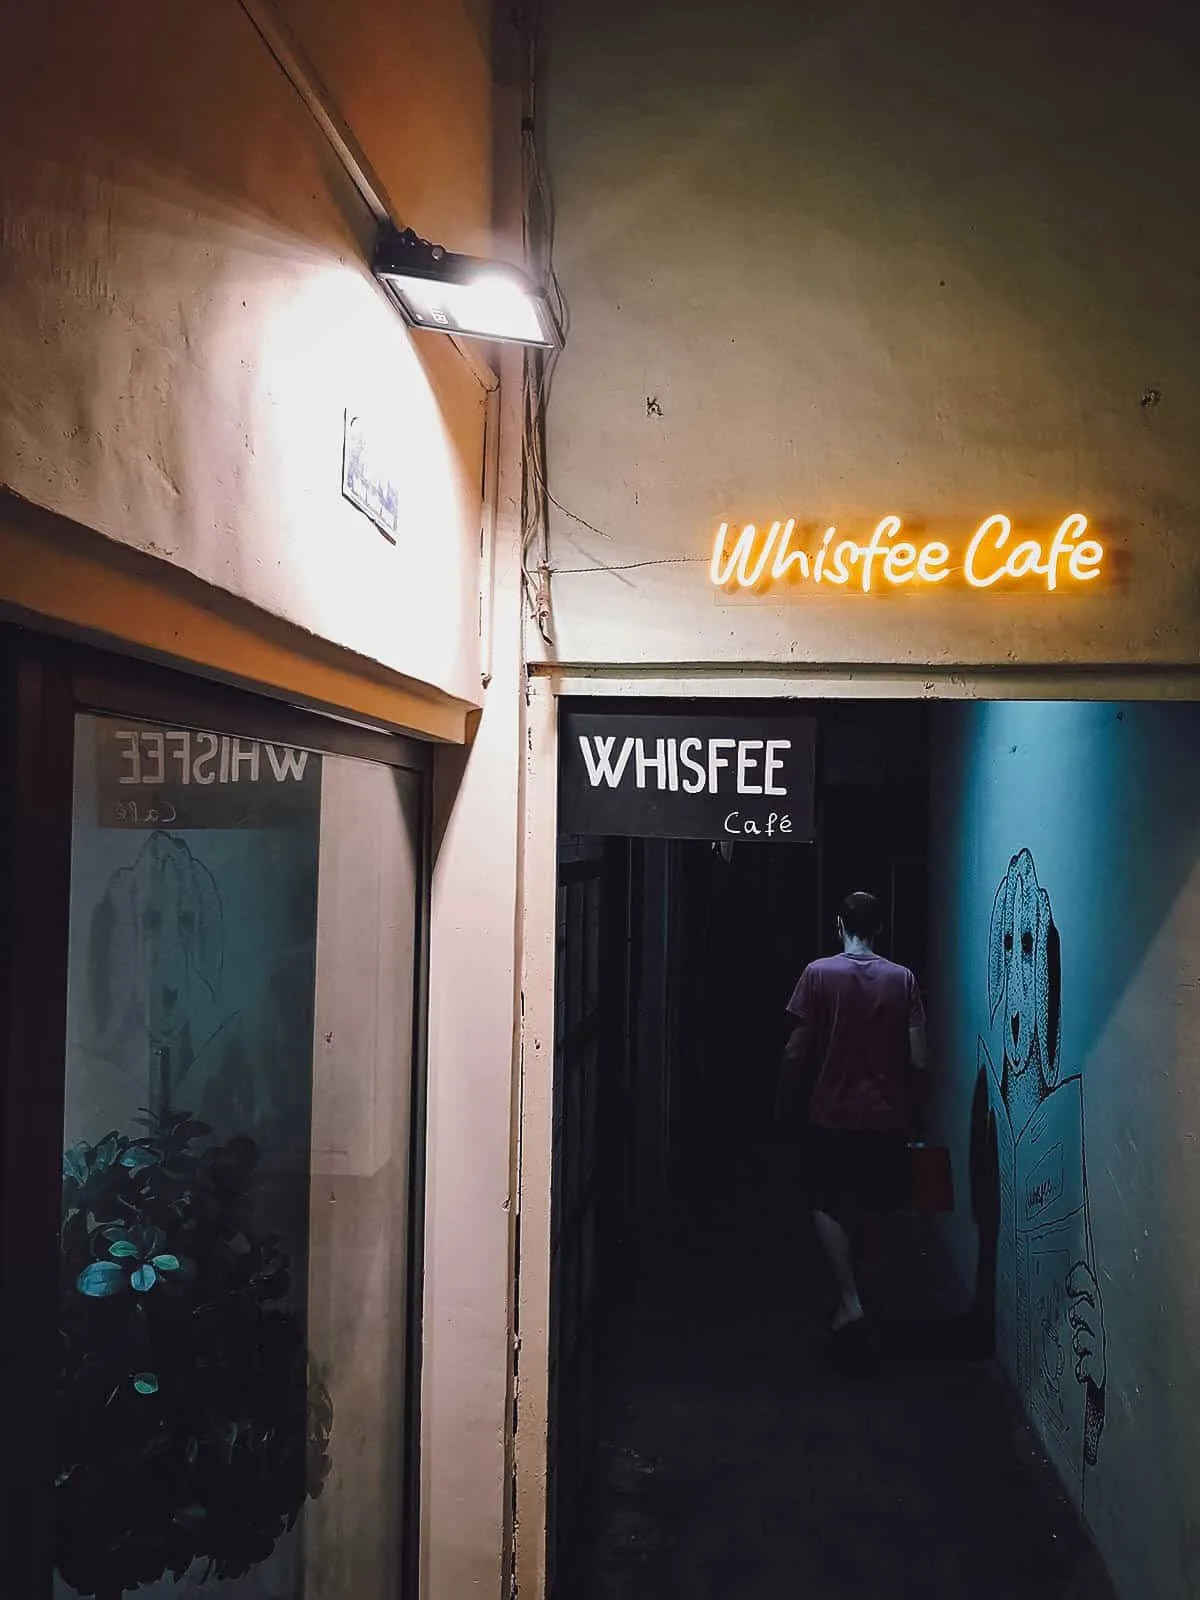 Whisfee Cafe sign